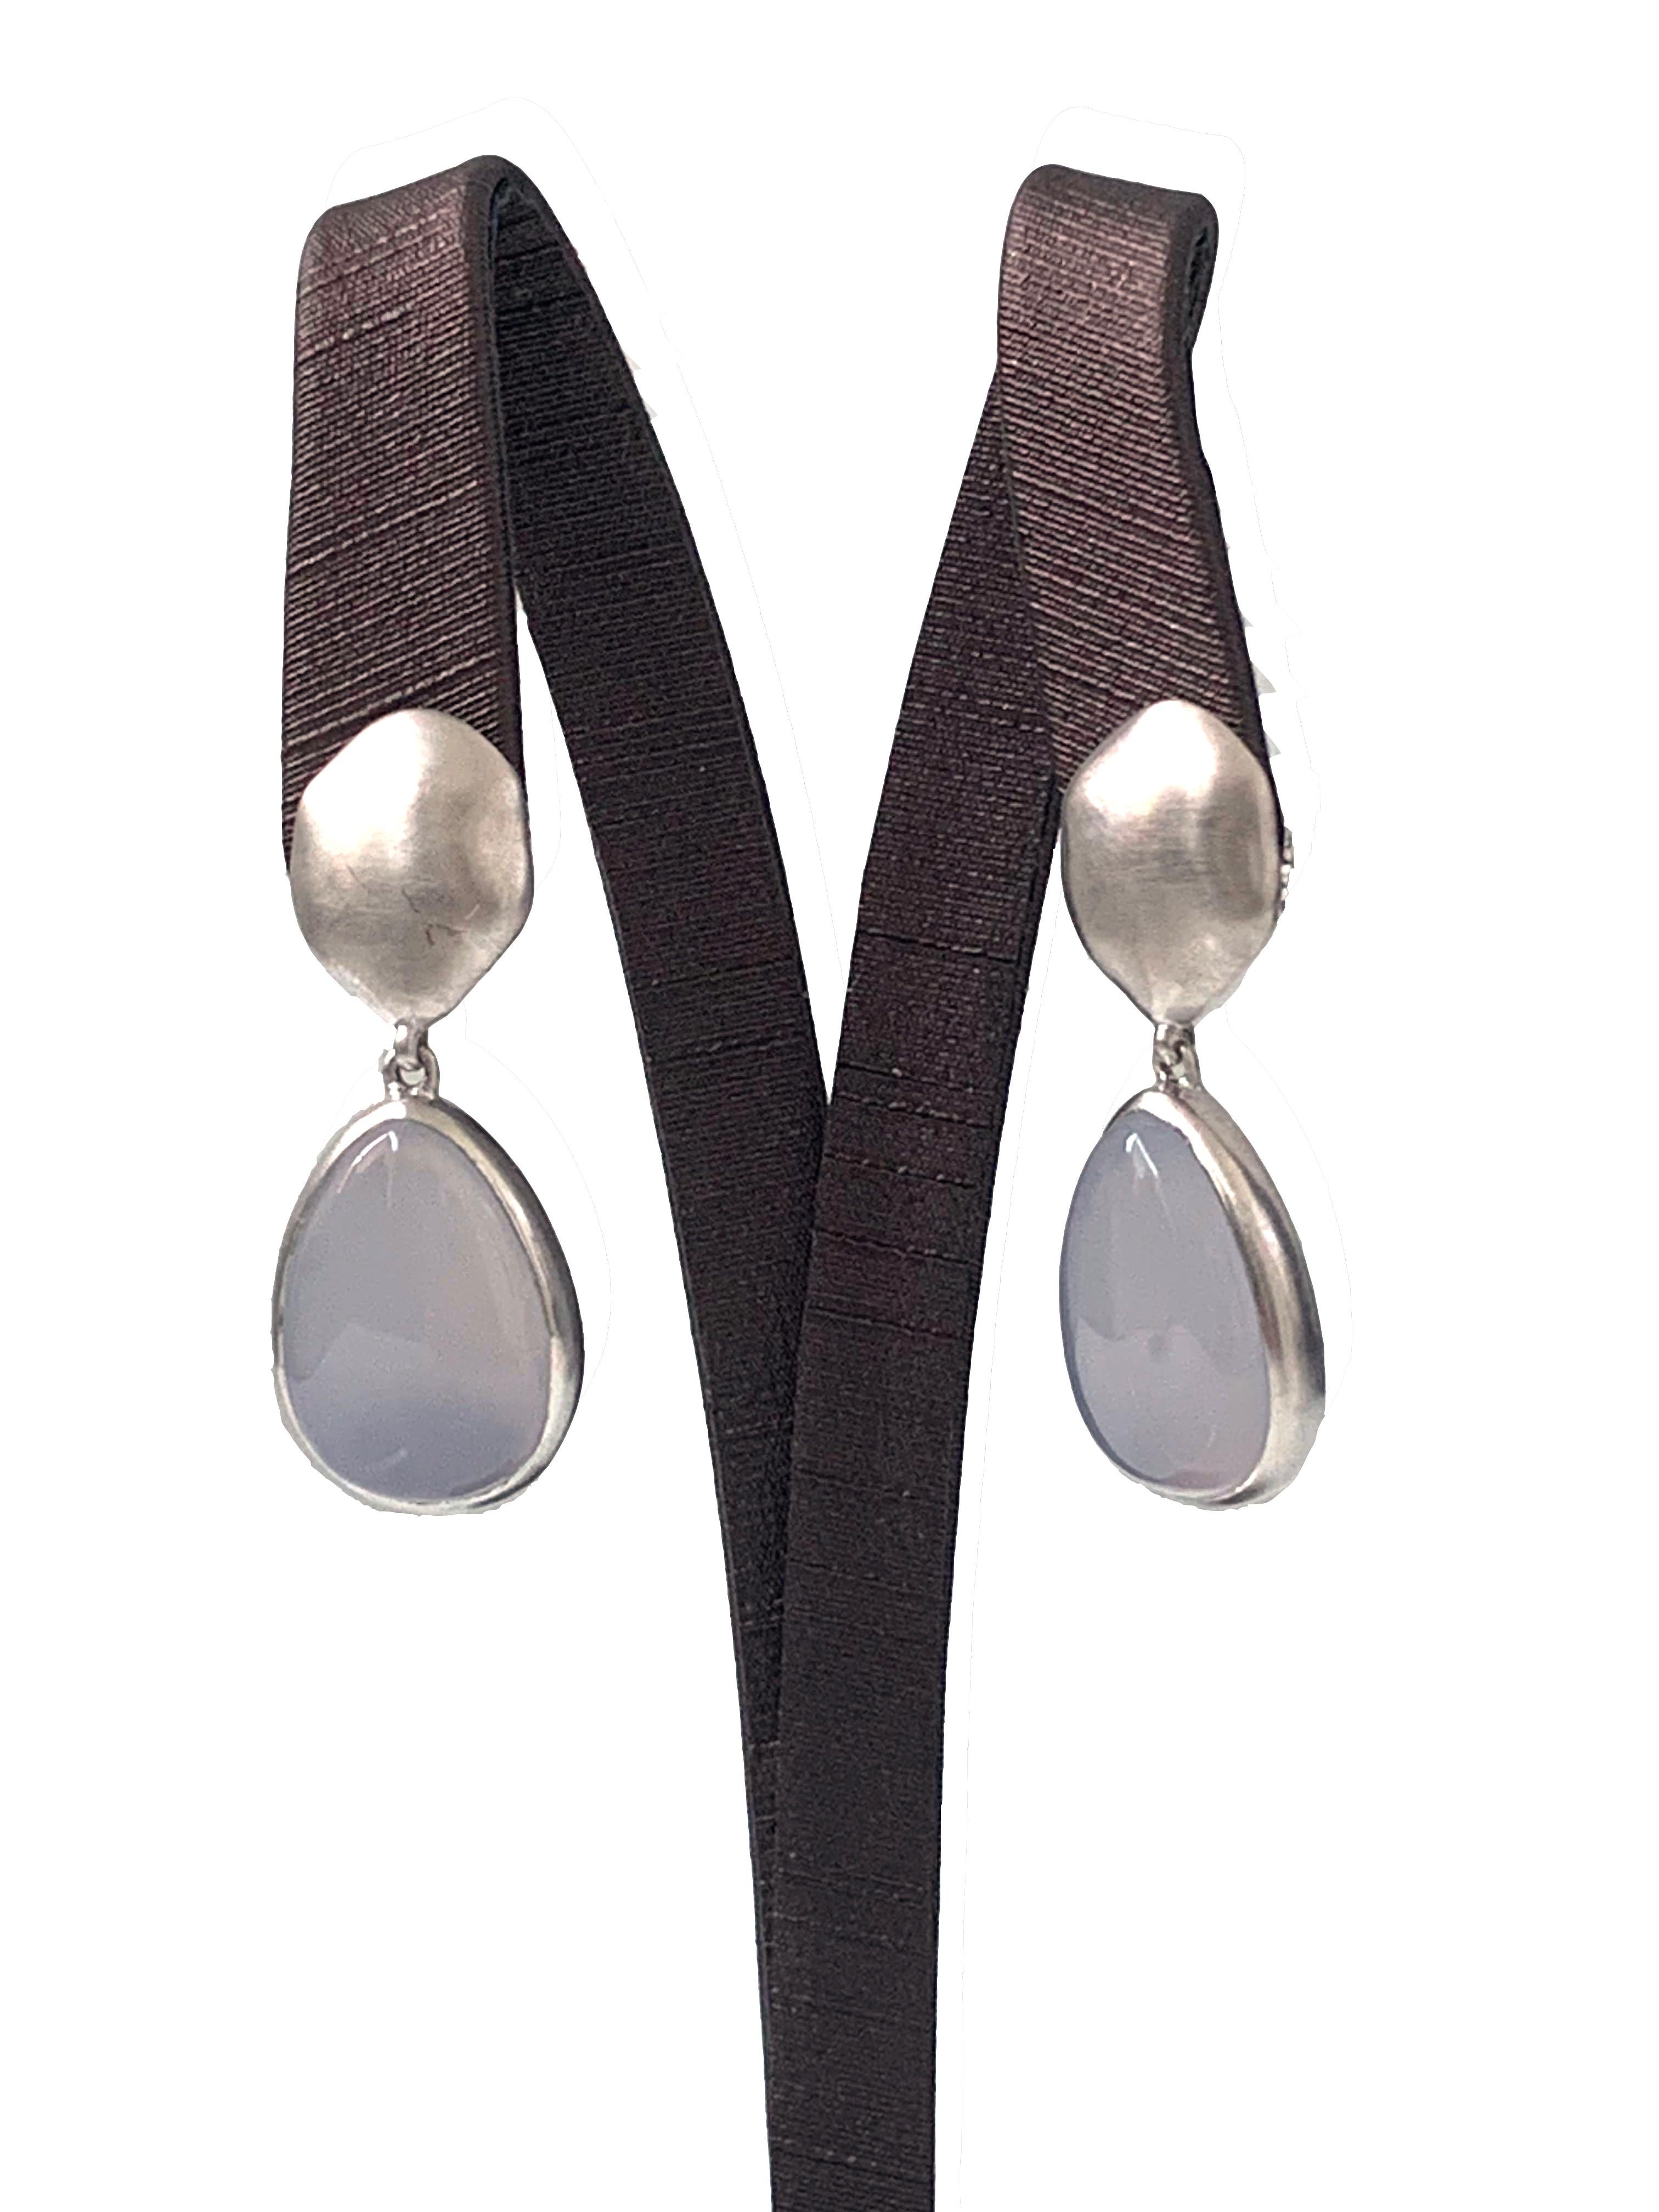 Discover pear-shape Chalcedony drop earrings. The earrings feature 2 large pear-shape cabochon-cut Chalcedony with unique periwinkle purple-ish blue hue, handcrafted brushed satin texturing technique, and hand set in platinum rhodium plated sterling